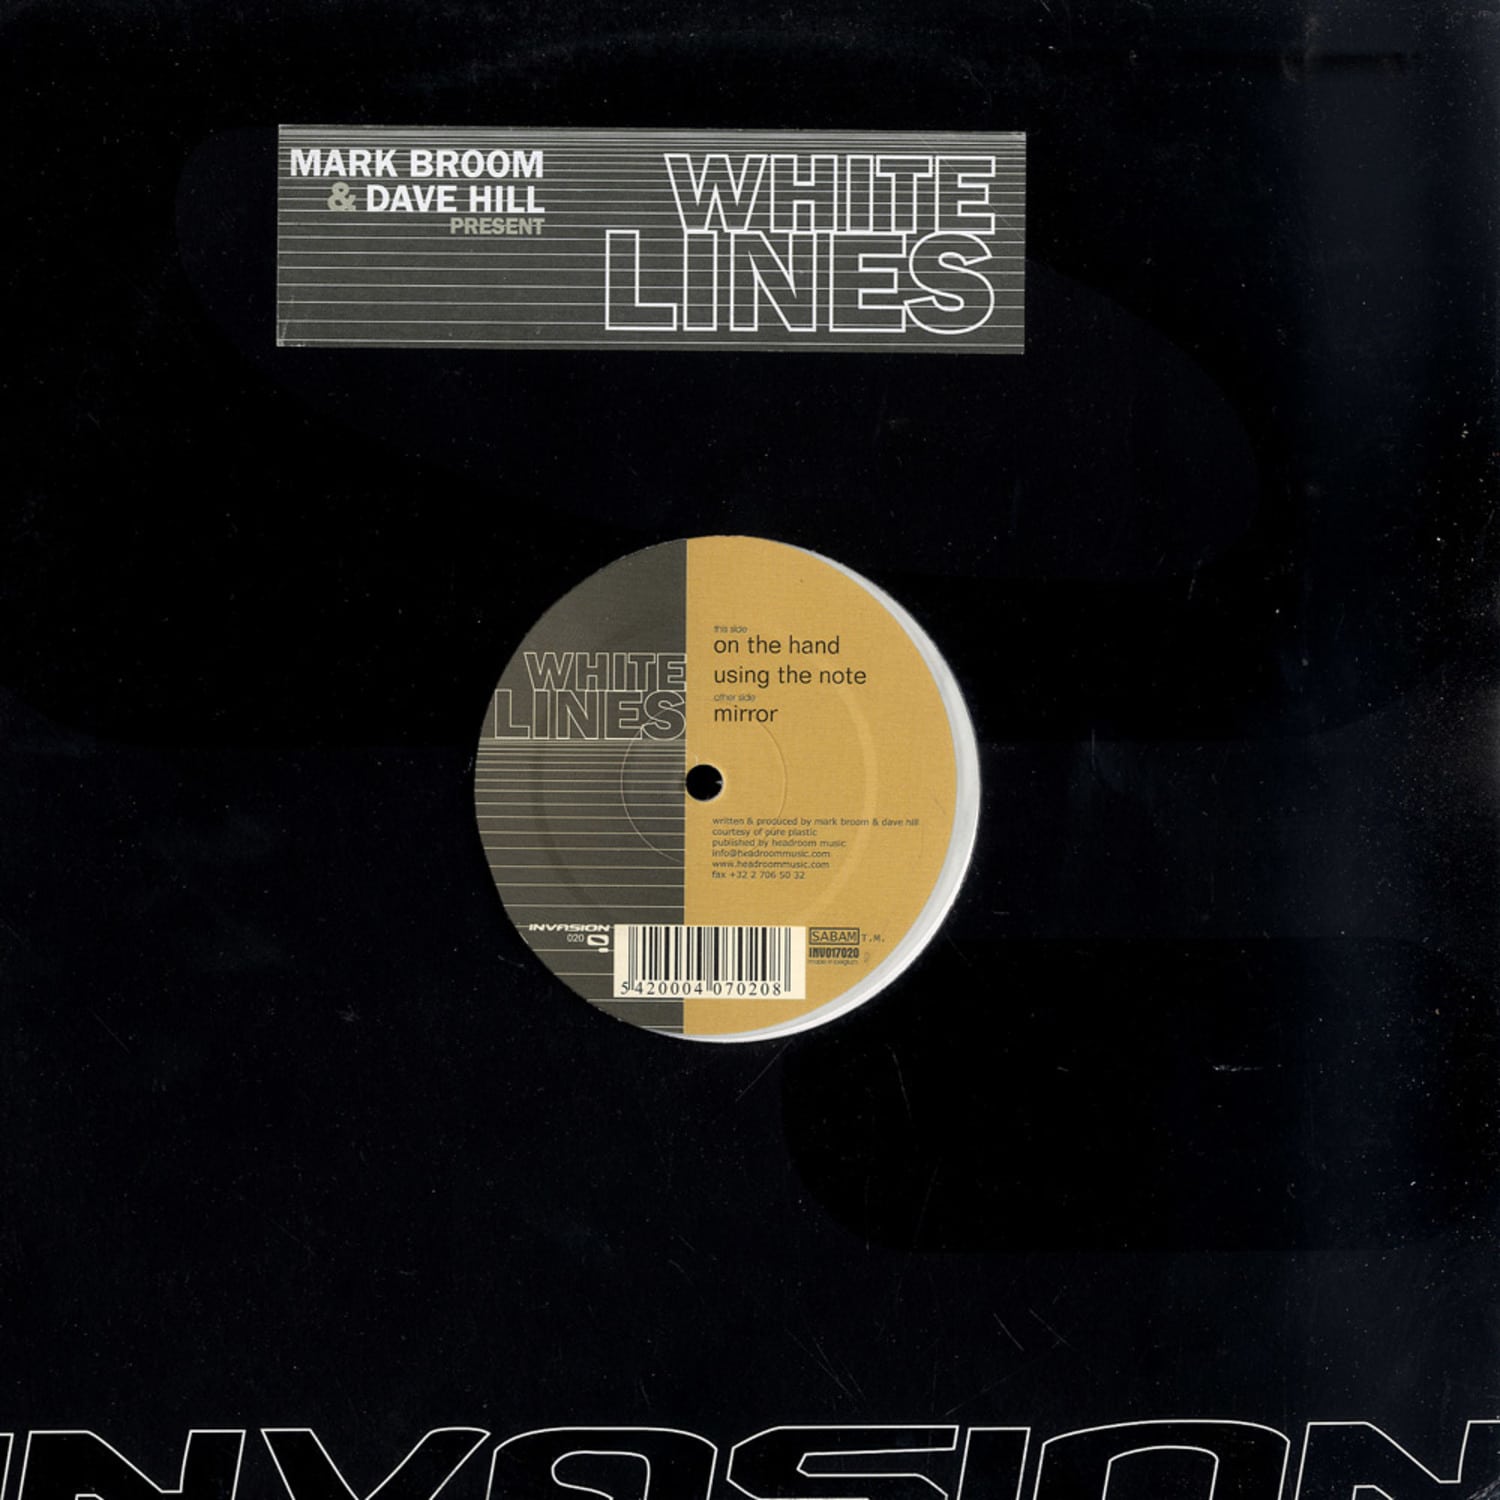 Mark Broom & Dave Hill - WHITE LINES 